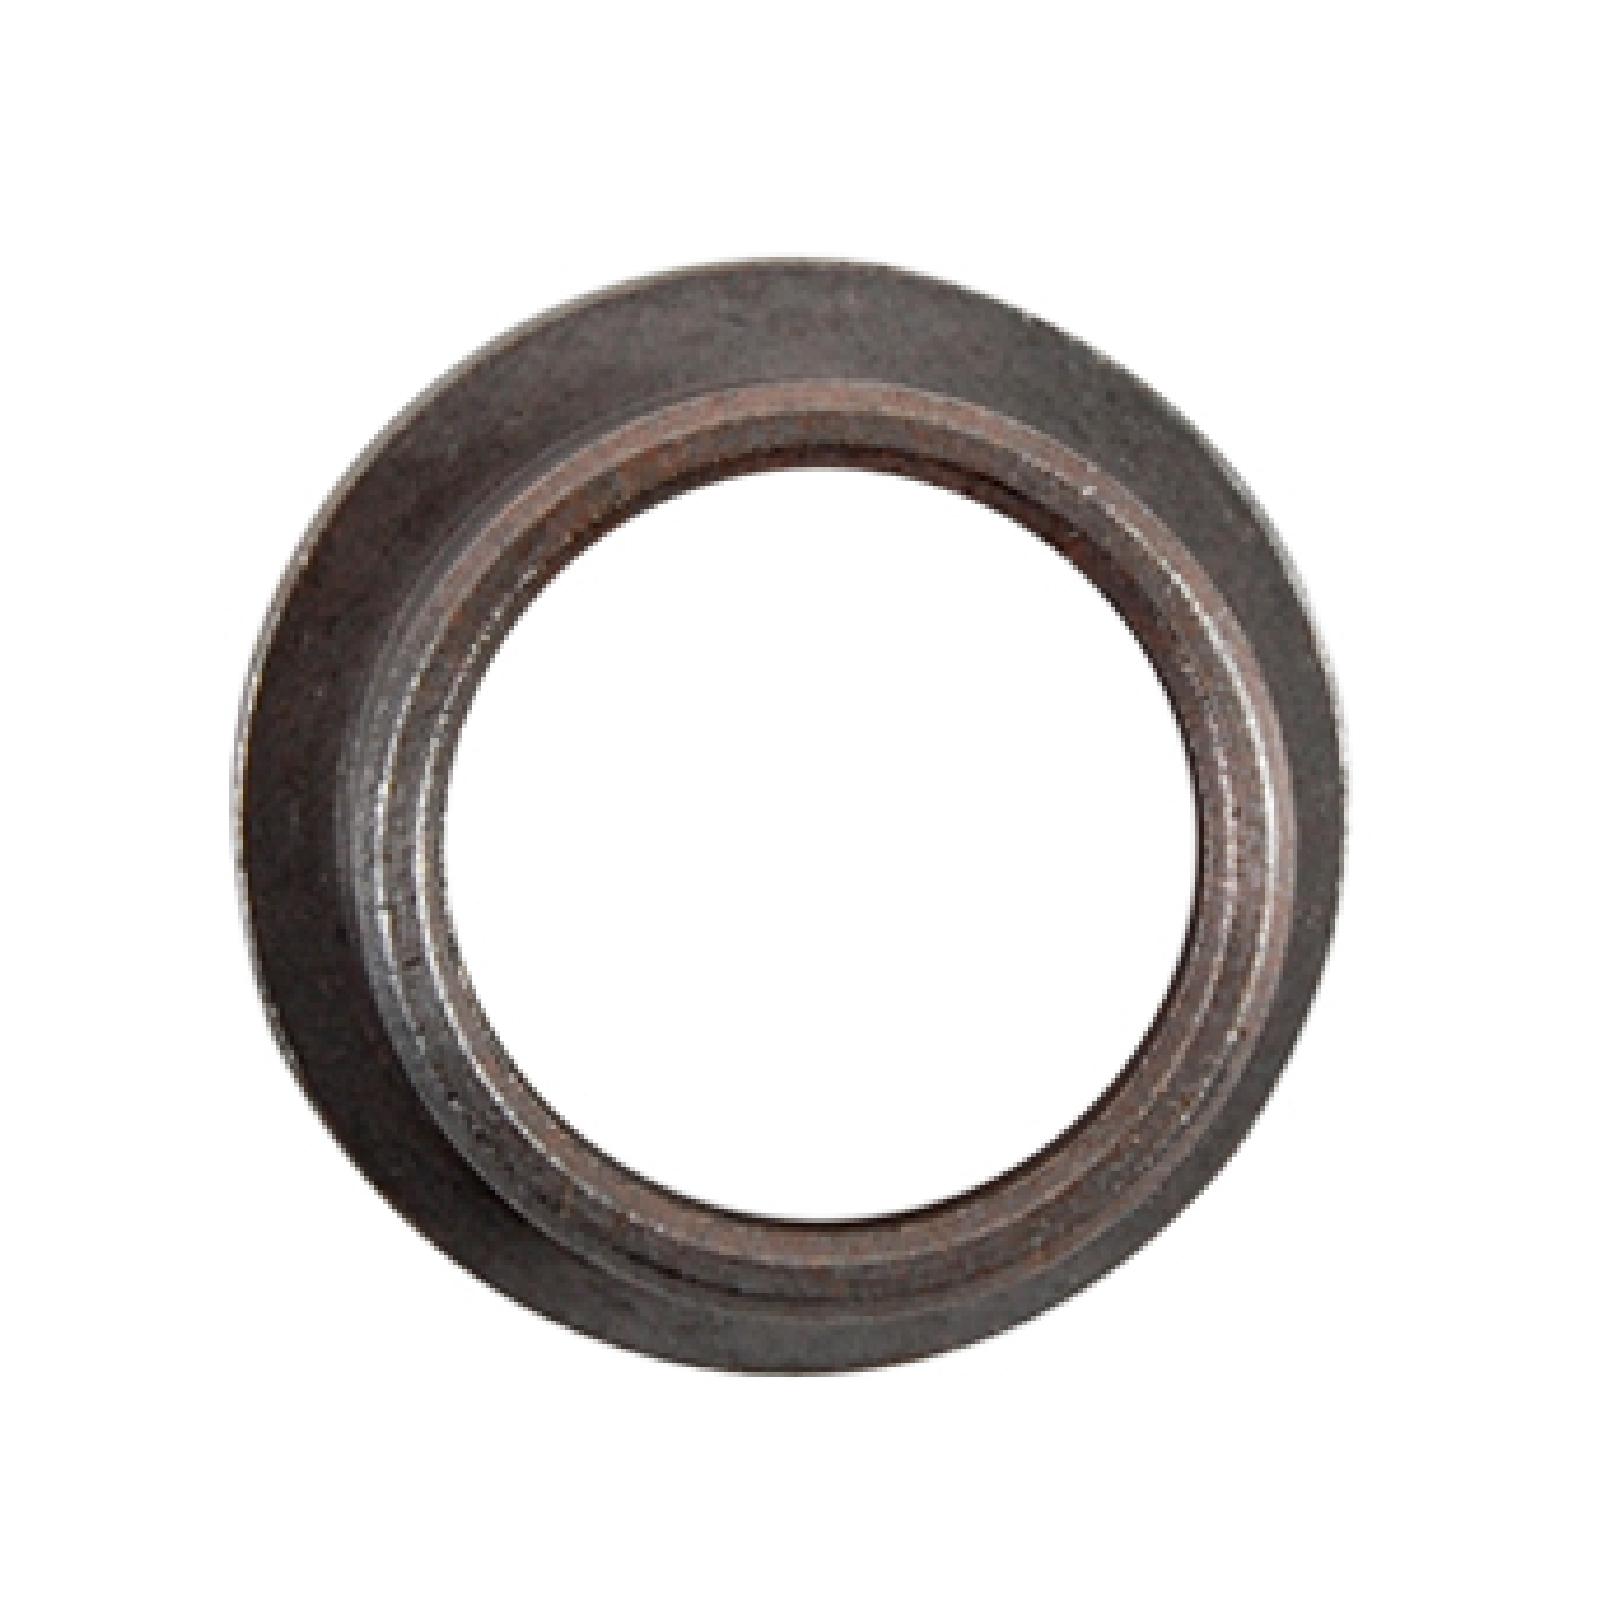 BEARING FLANGE part# 74104488 by MTD